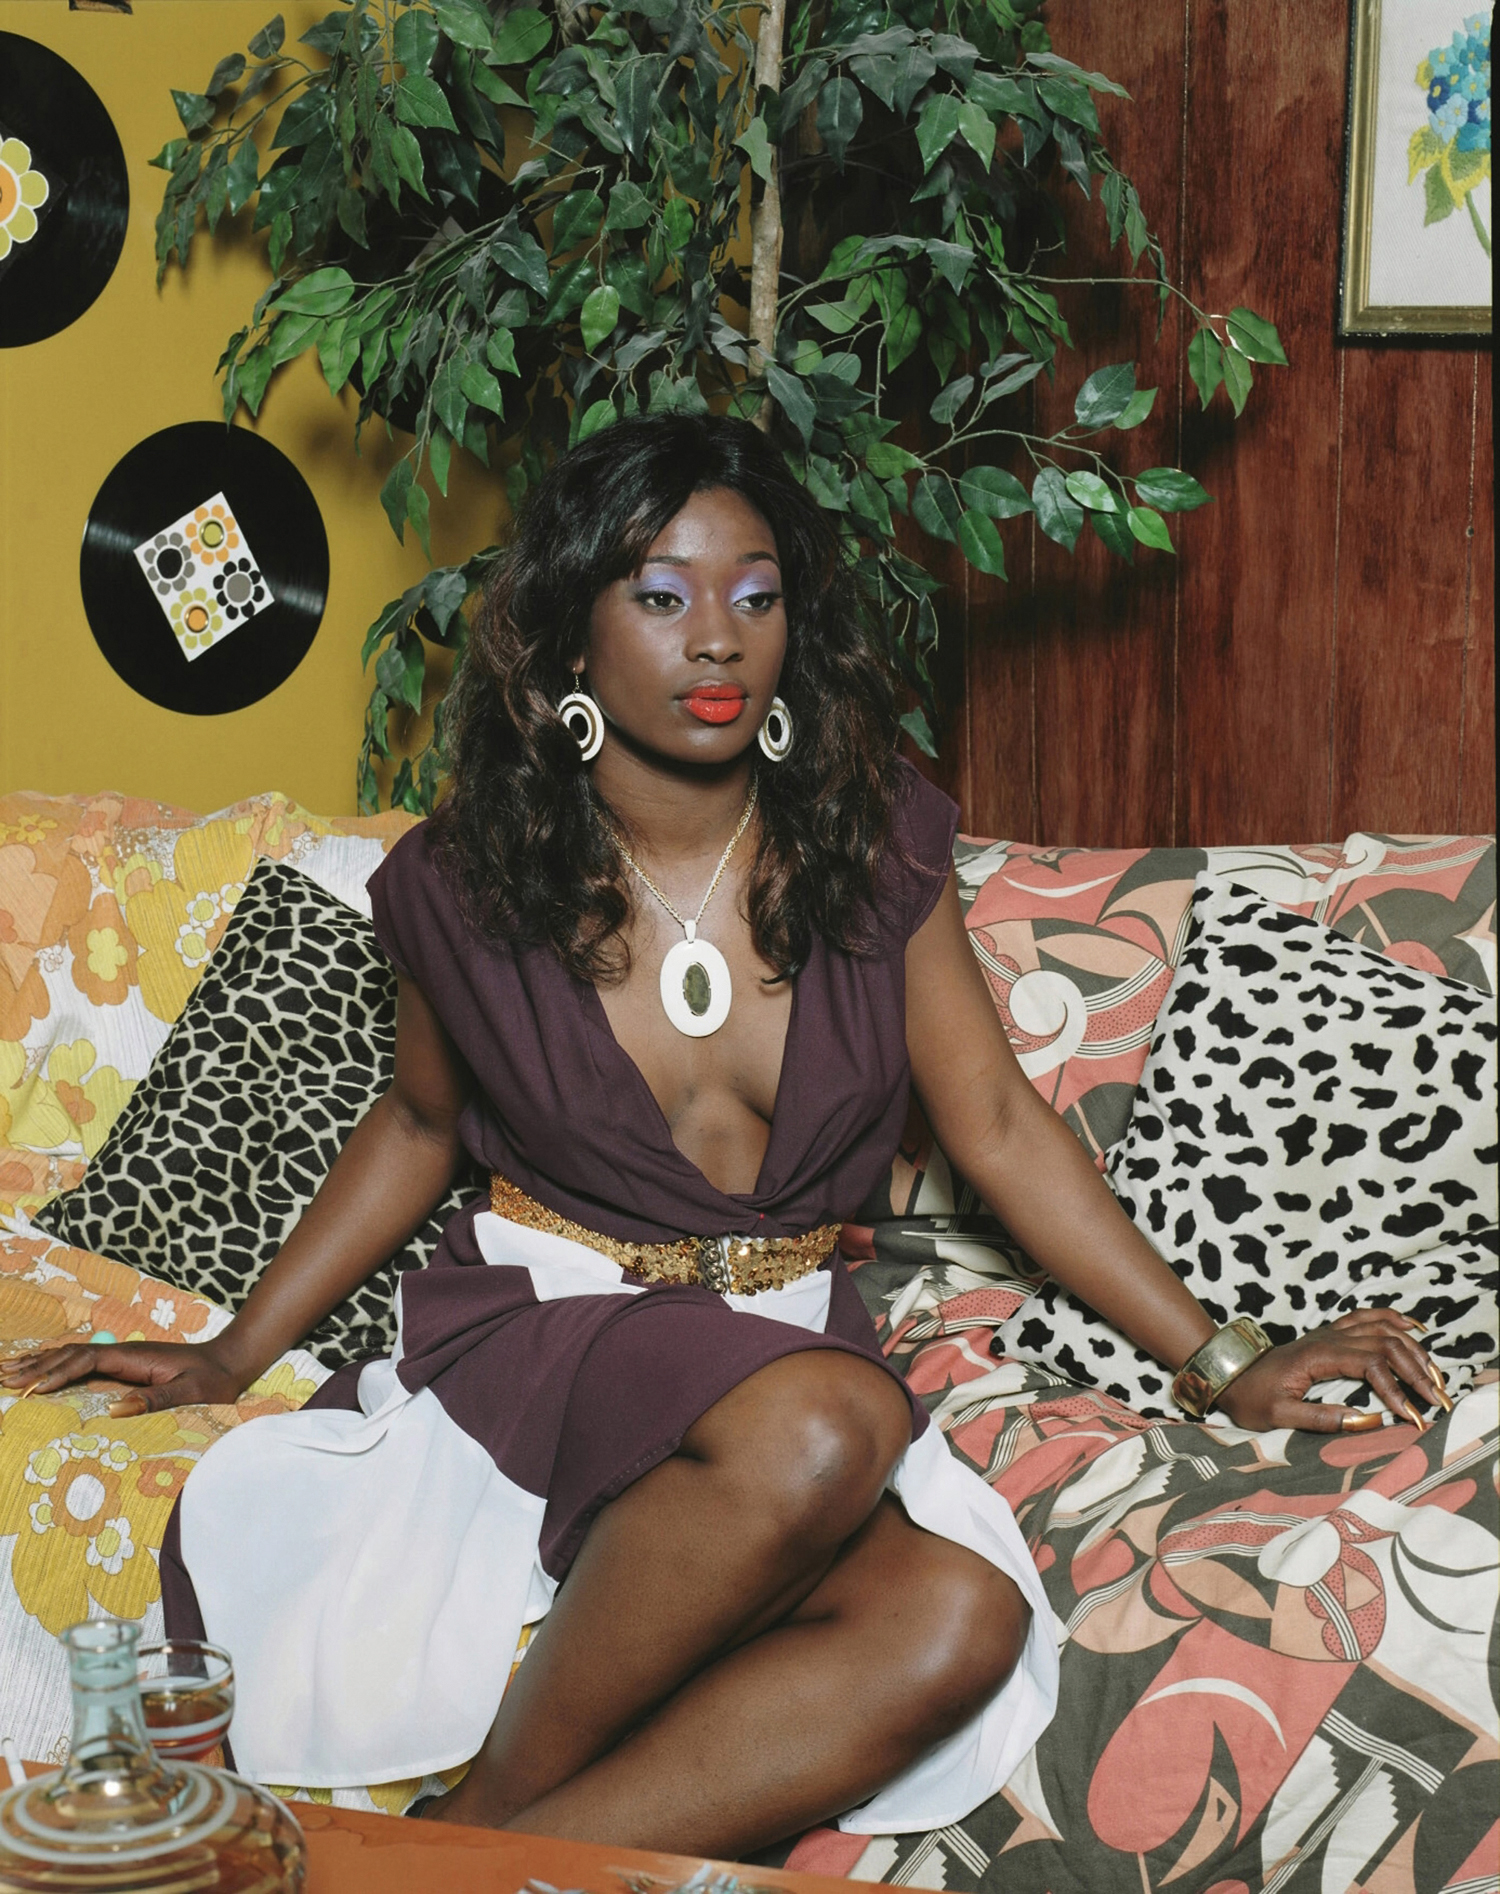 Mickalene Thomas, Portrait of Qusuquzah, 2008. C-print, 70¼ x 56¼ inches. Courtesy of the artist, Lehmann Maupin, New York and Hong Kong, and Artists Rights Society (ARS), New York